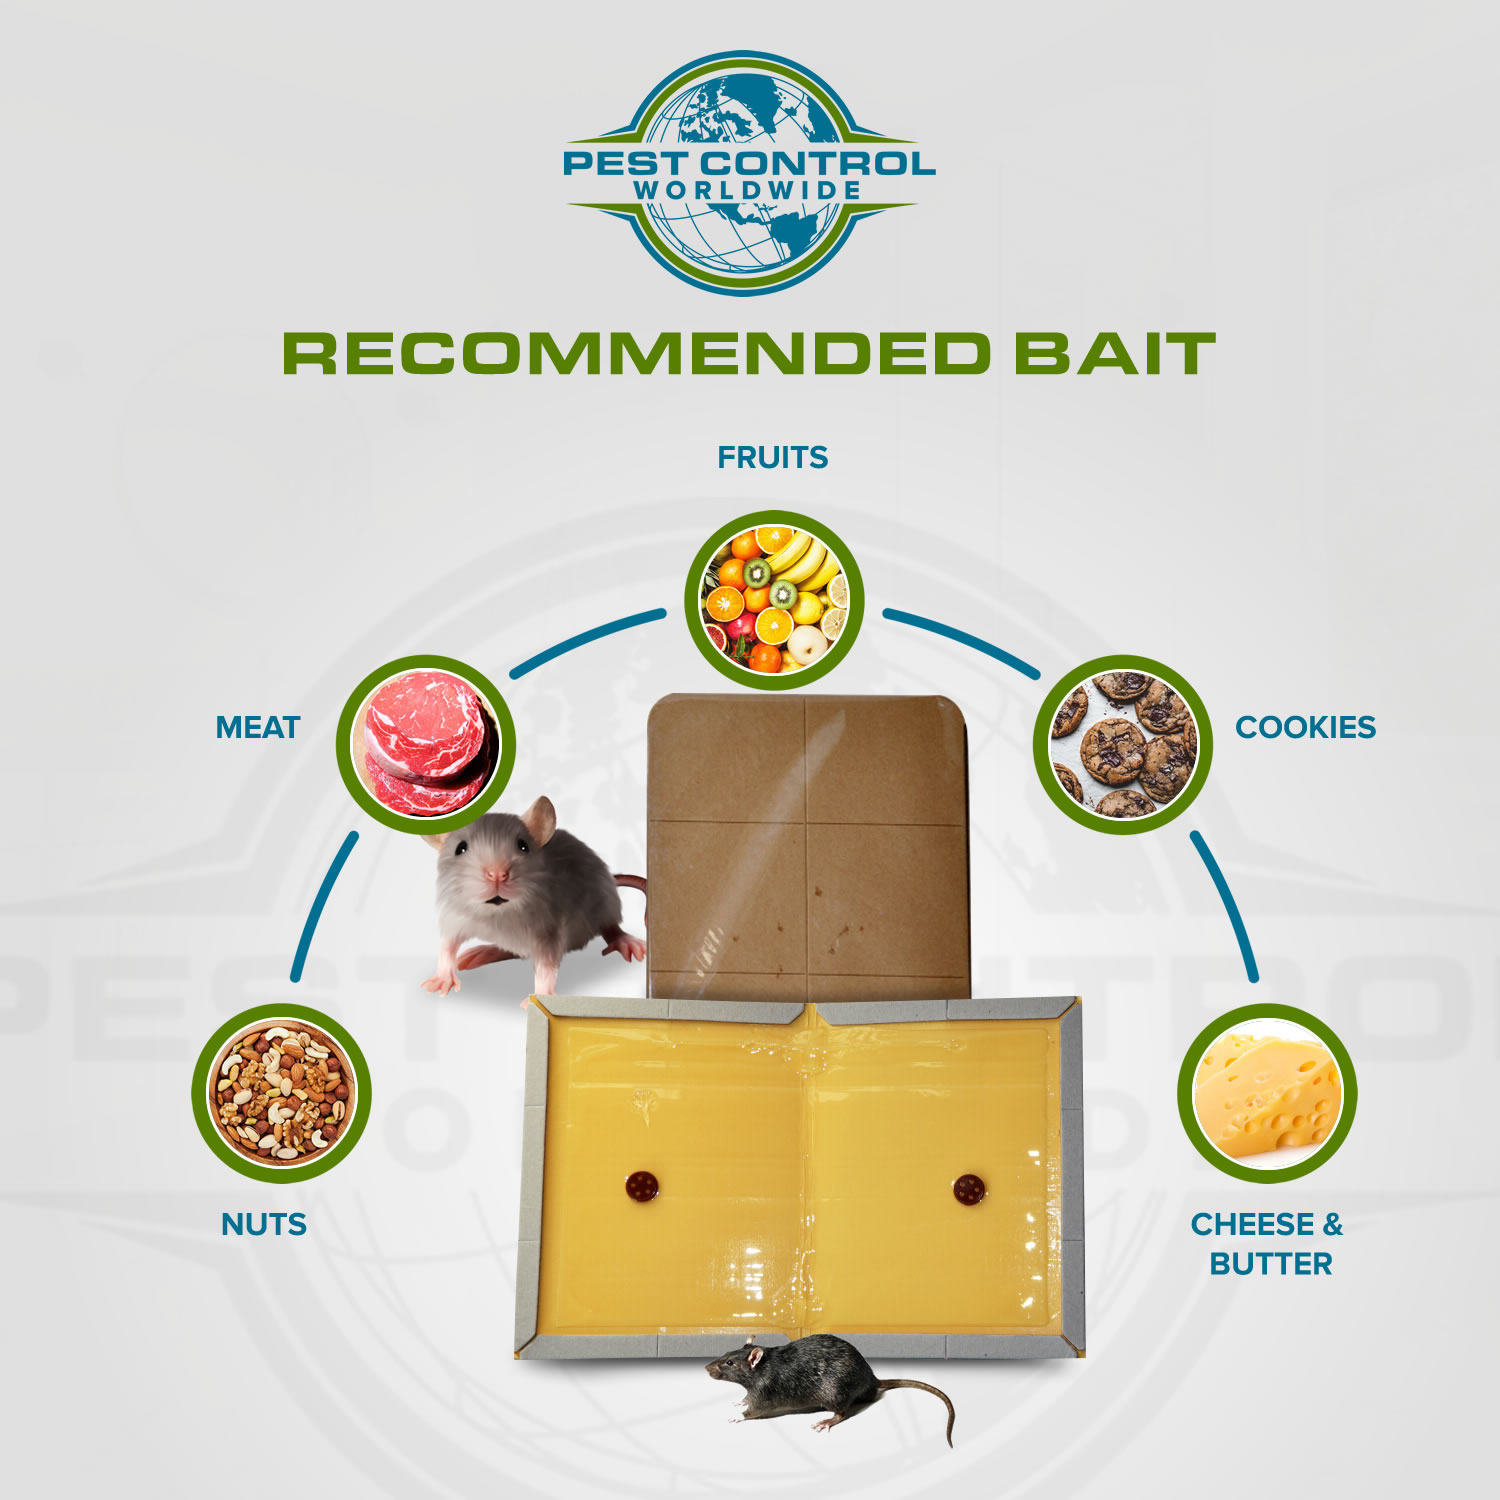 Mouse traps or glue boards? Which are better? - Envirocare Pest Control